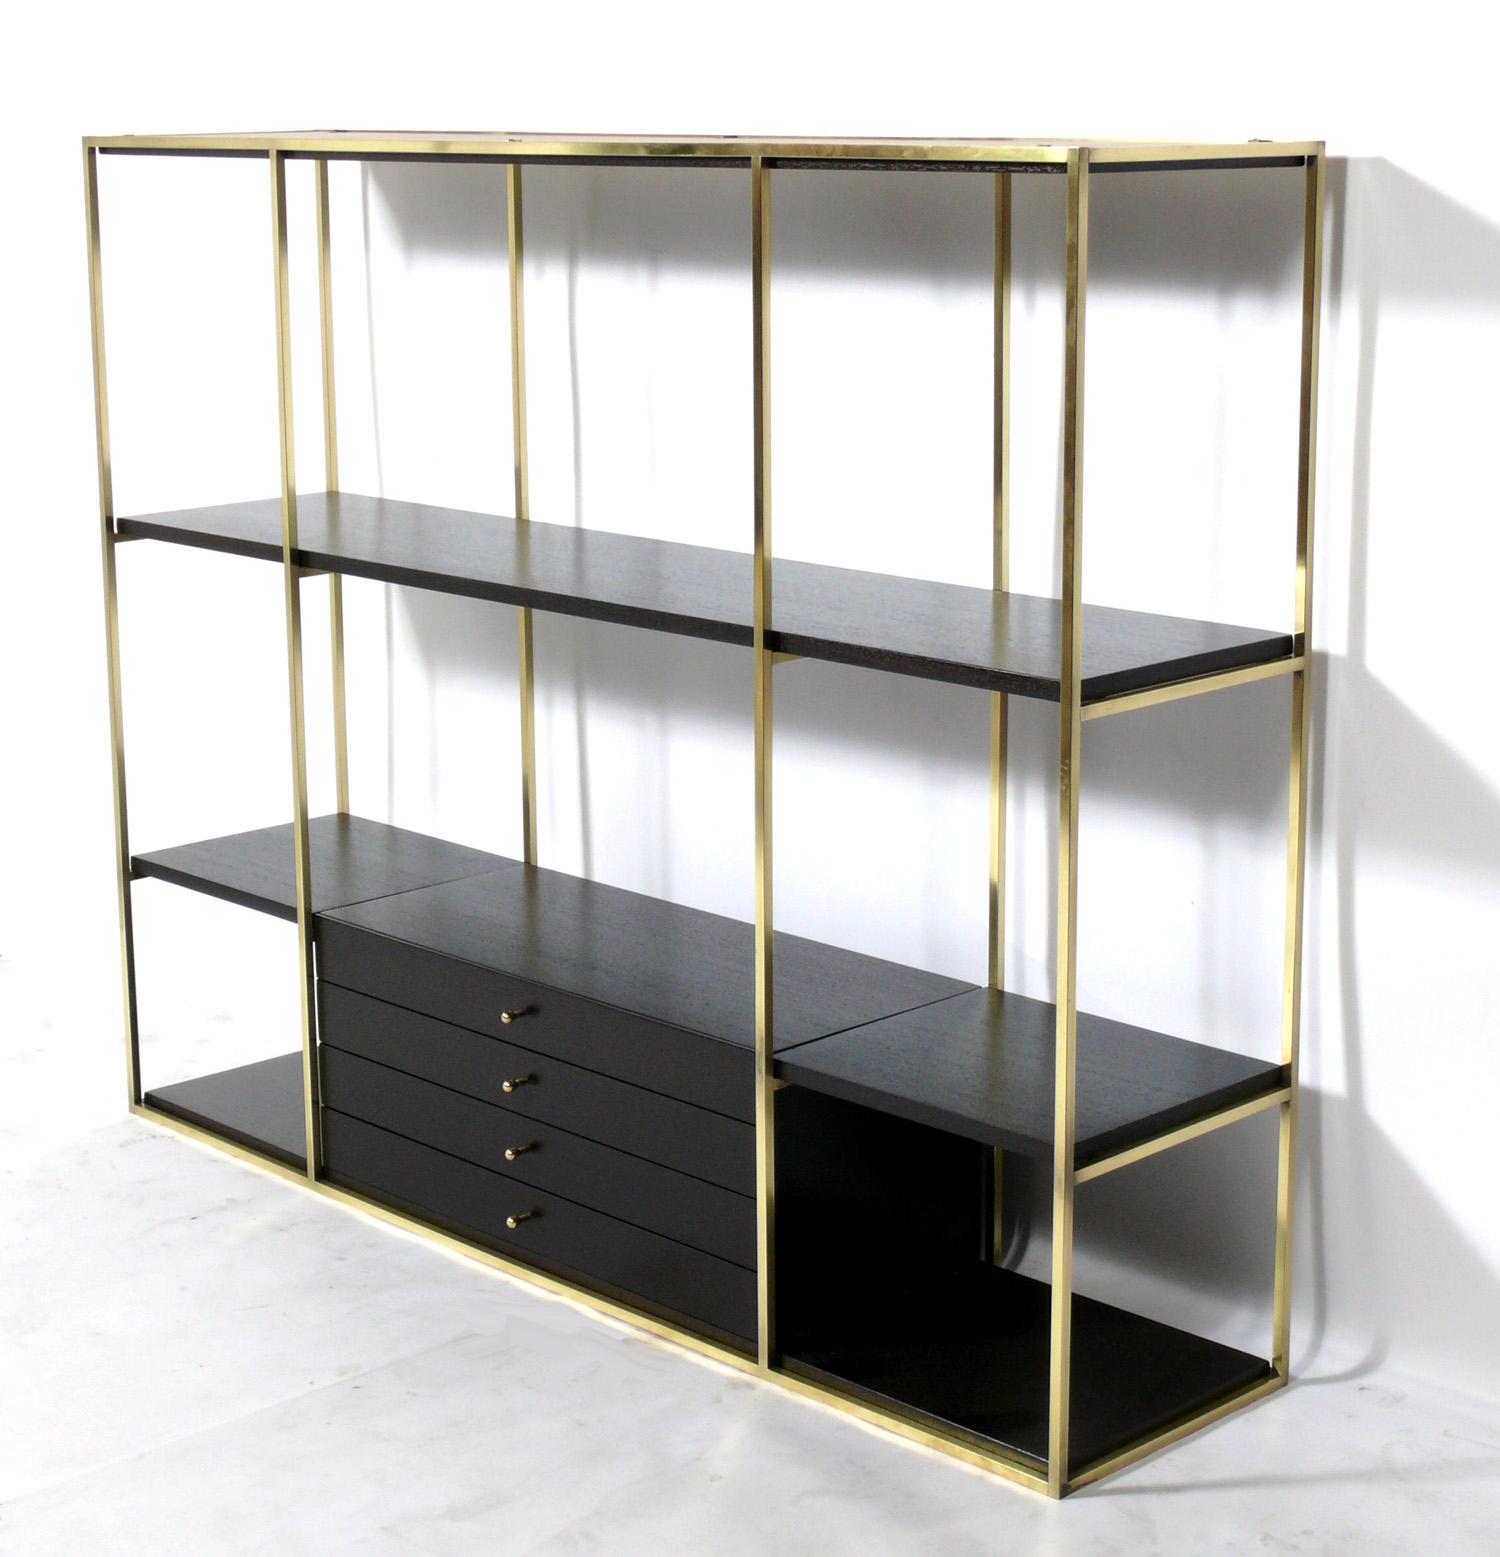 Mid-Century Modern étagère or bookshelf, designed by Paul McCobb for Calvin, American, circa 1950s. Signed inside drawer. It has been completely restored in a deep brown color finish and the brass portions have been polished and lacquered.